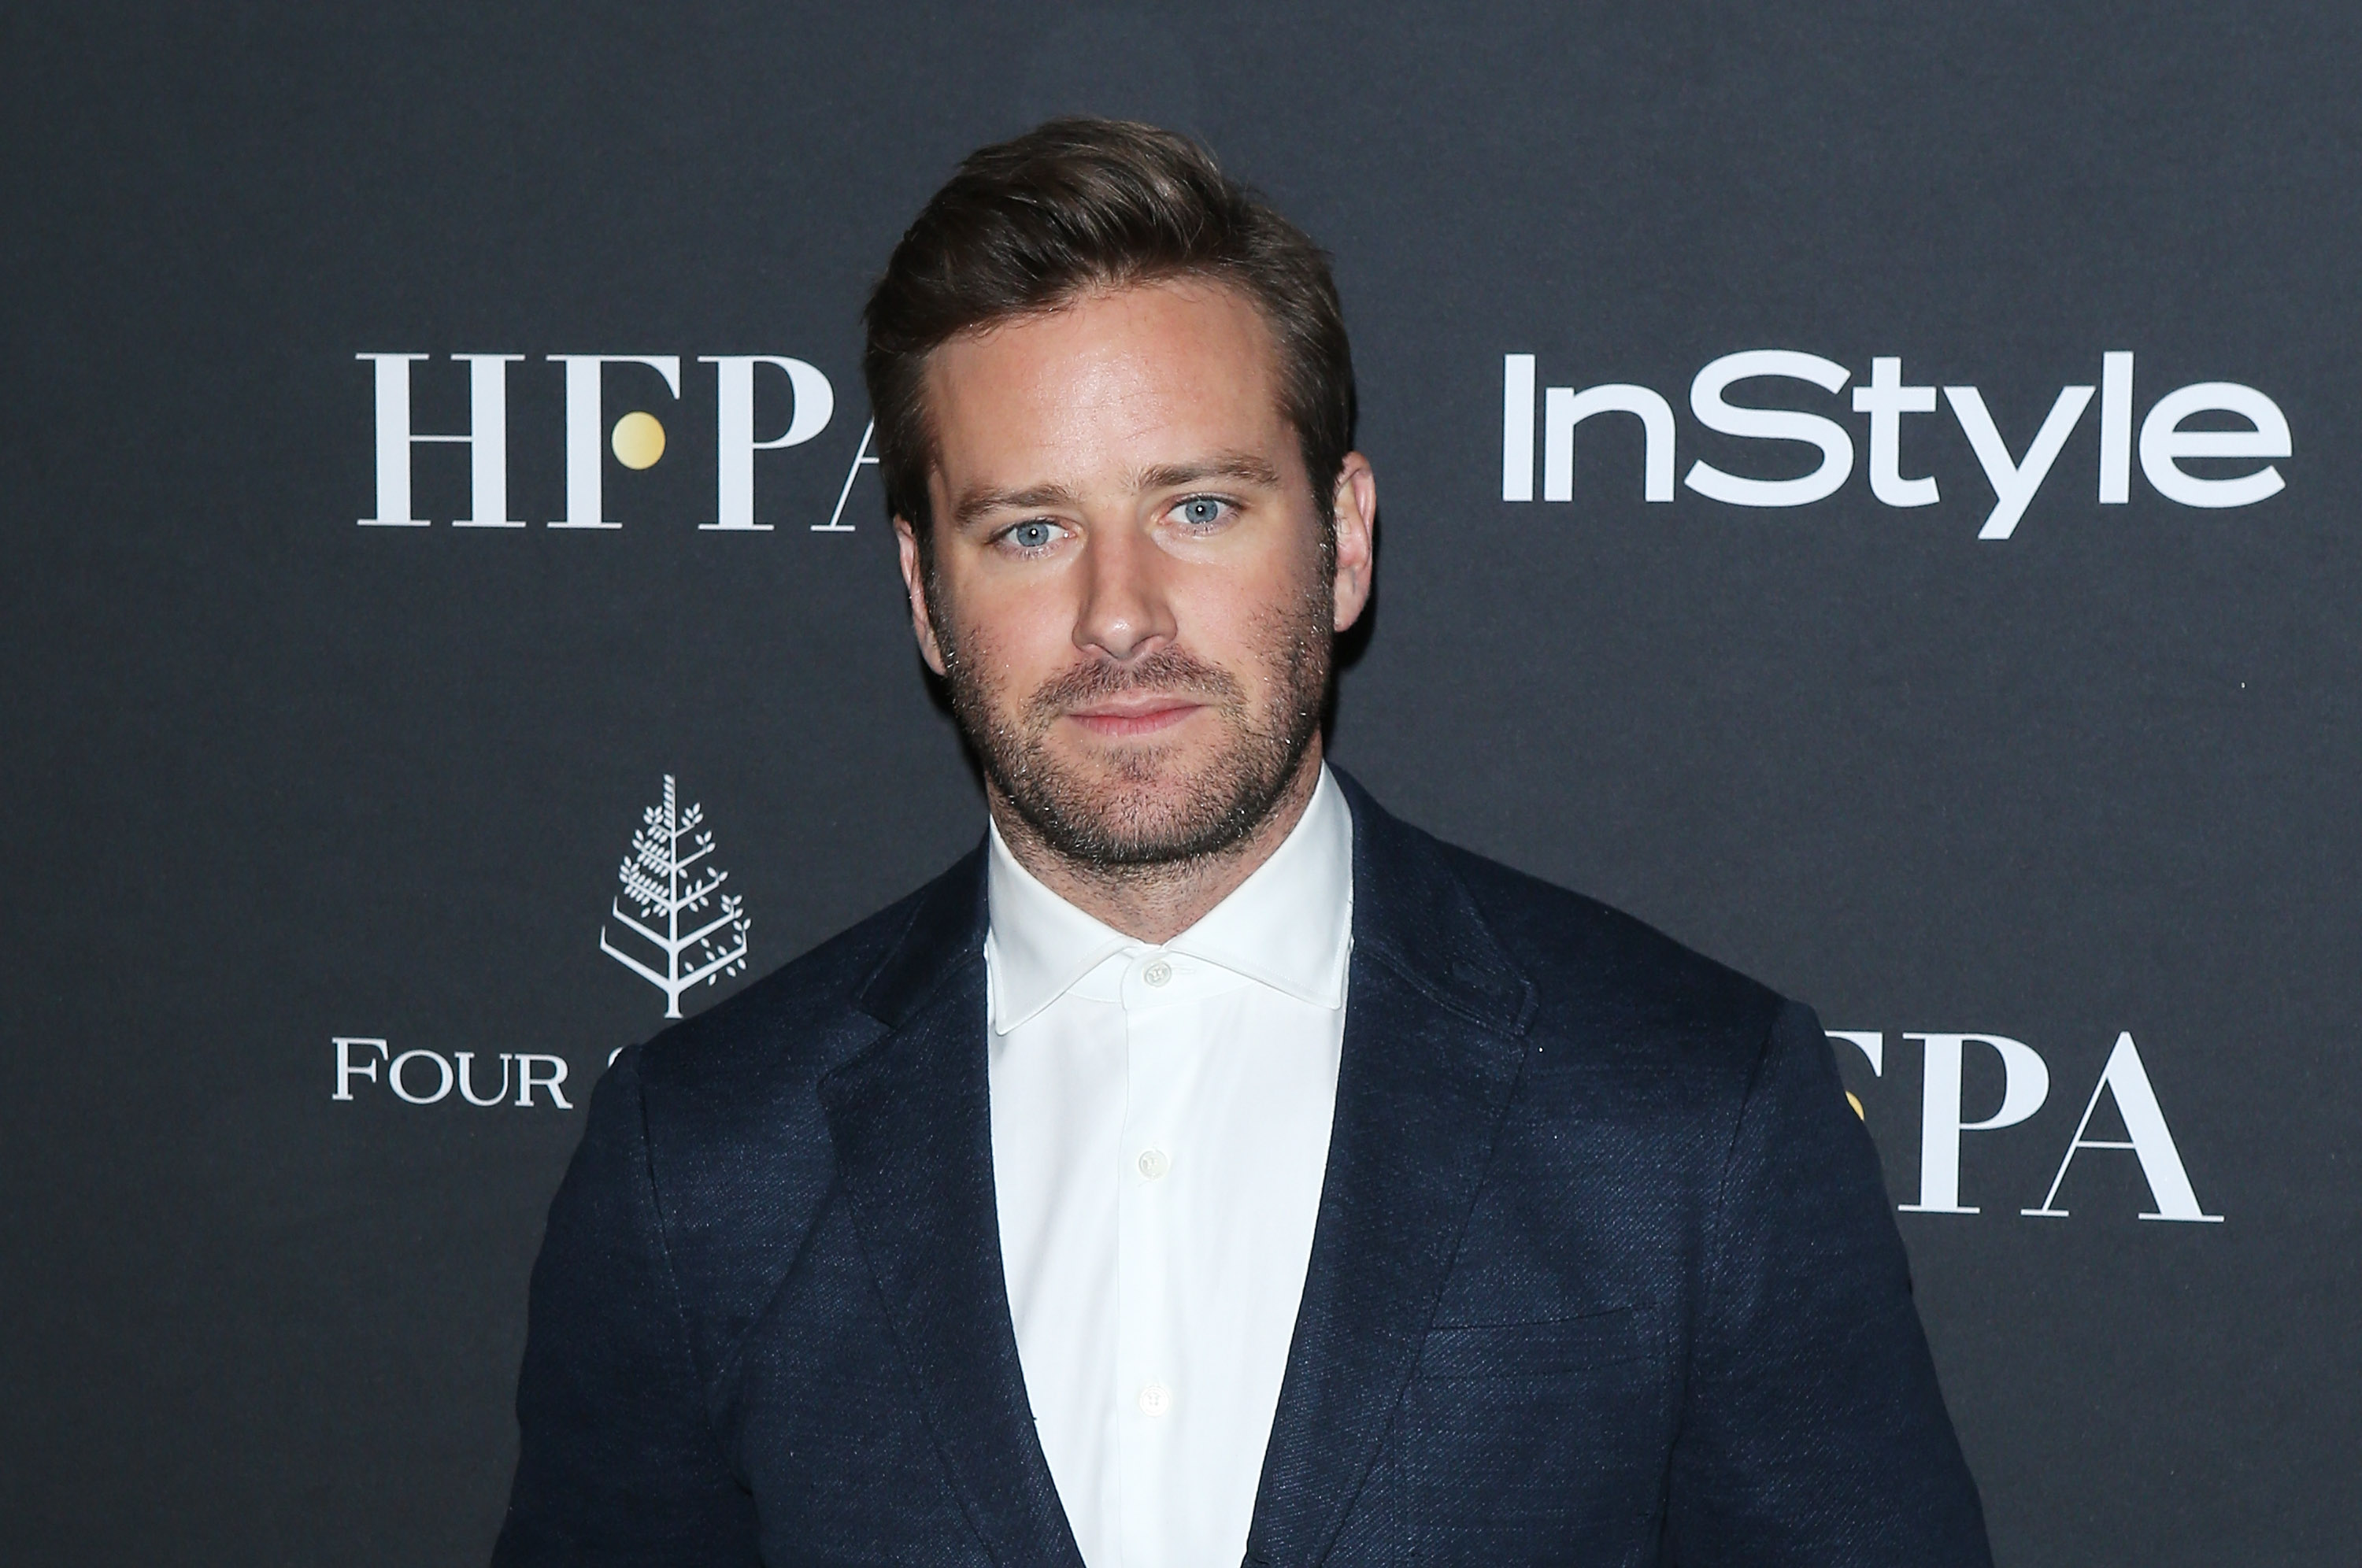 Armie Hammer attends The Hollywood Foreign Press Association and InStyle party during 2018 Toronto International Film Festival held at Four Seasons Hotel on September 8, 2018 in Toronto, Canada. Hammer was recently cast in the upcoming movie "Death in the Nile."  (Photo by Michael Tran/FilmMagic/Getty Images)